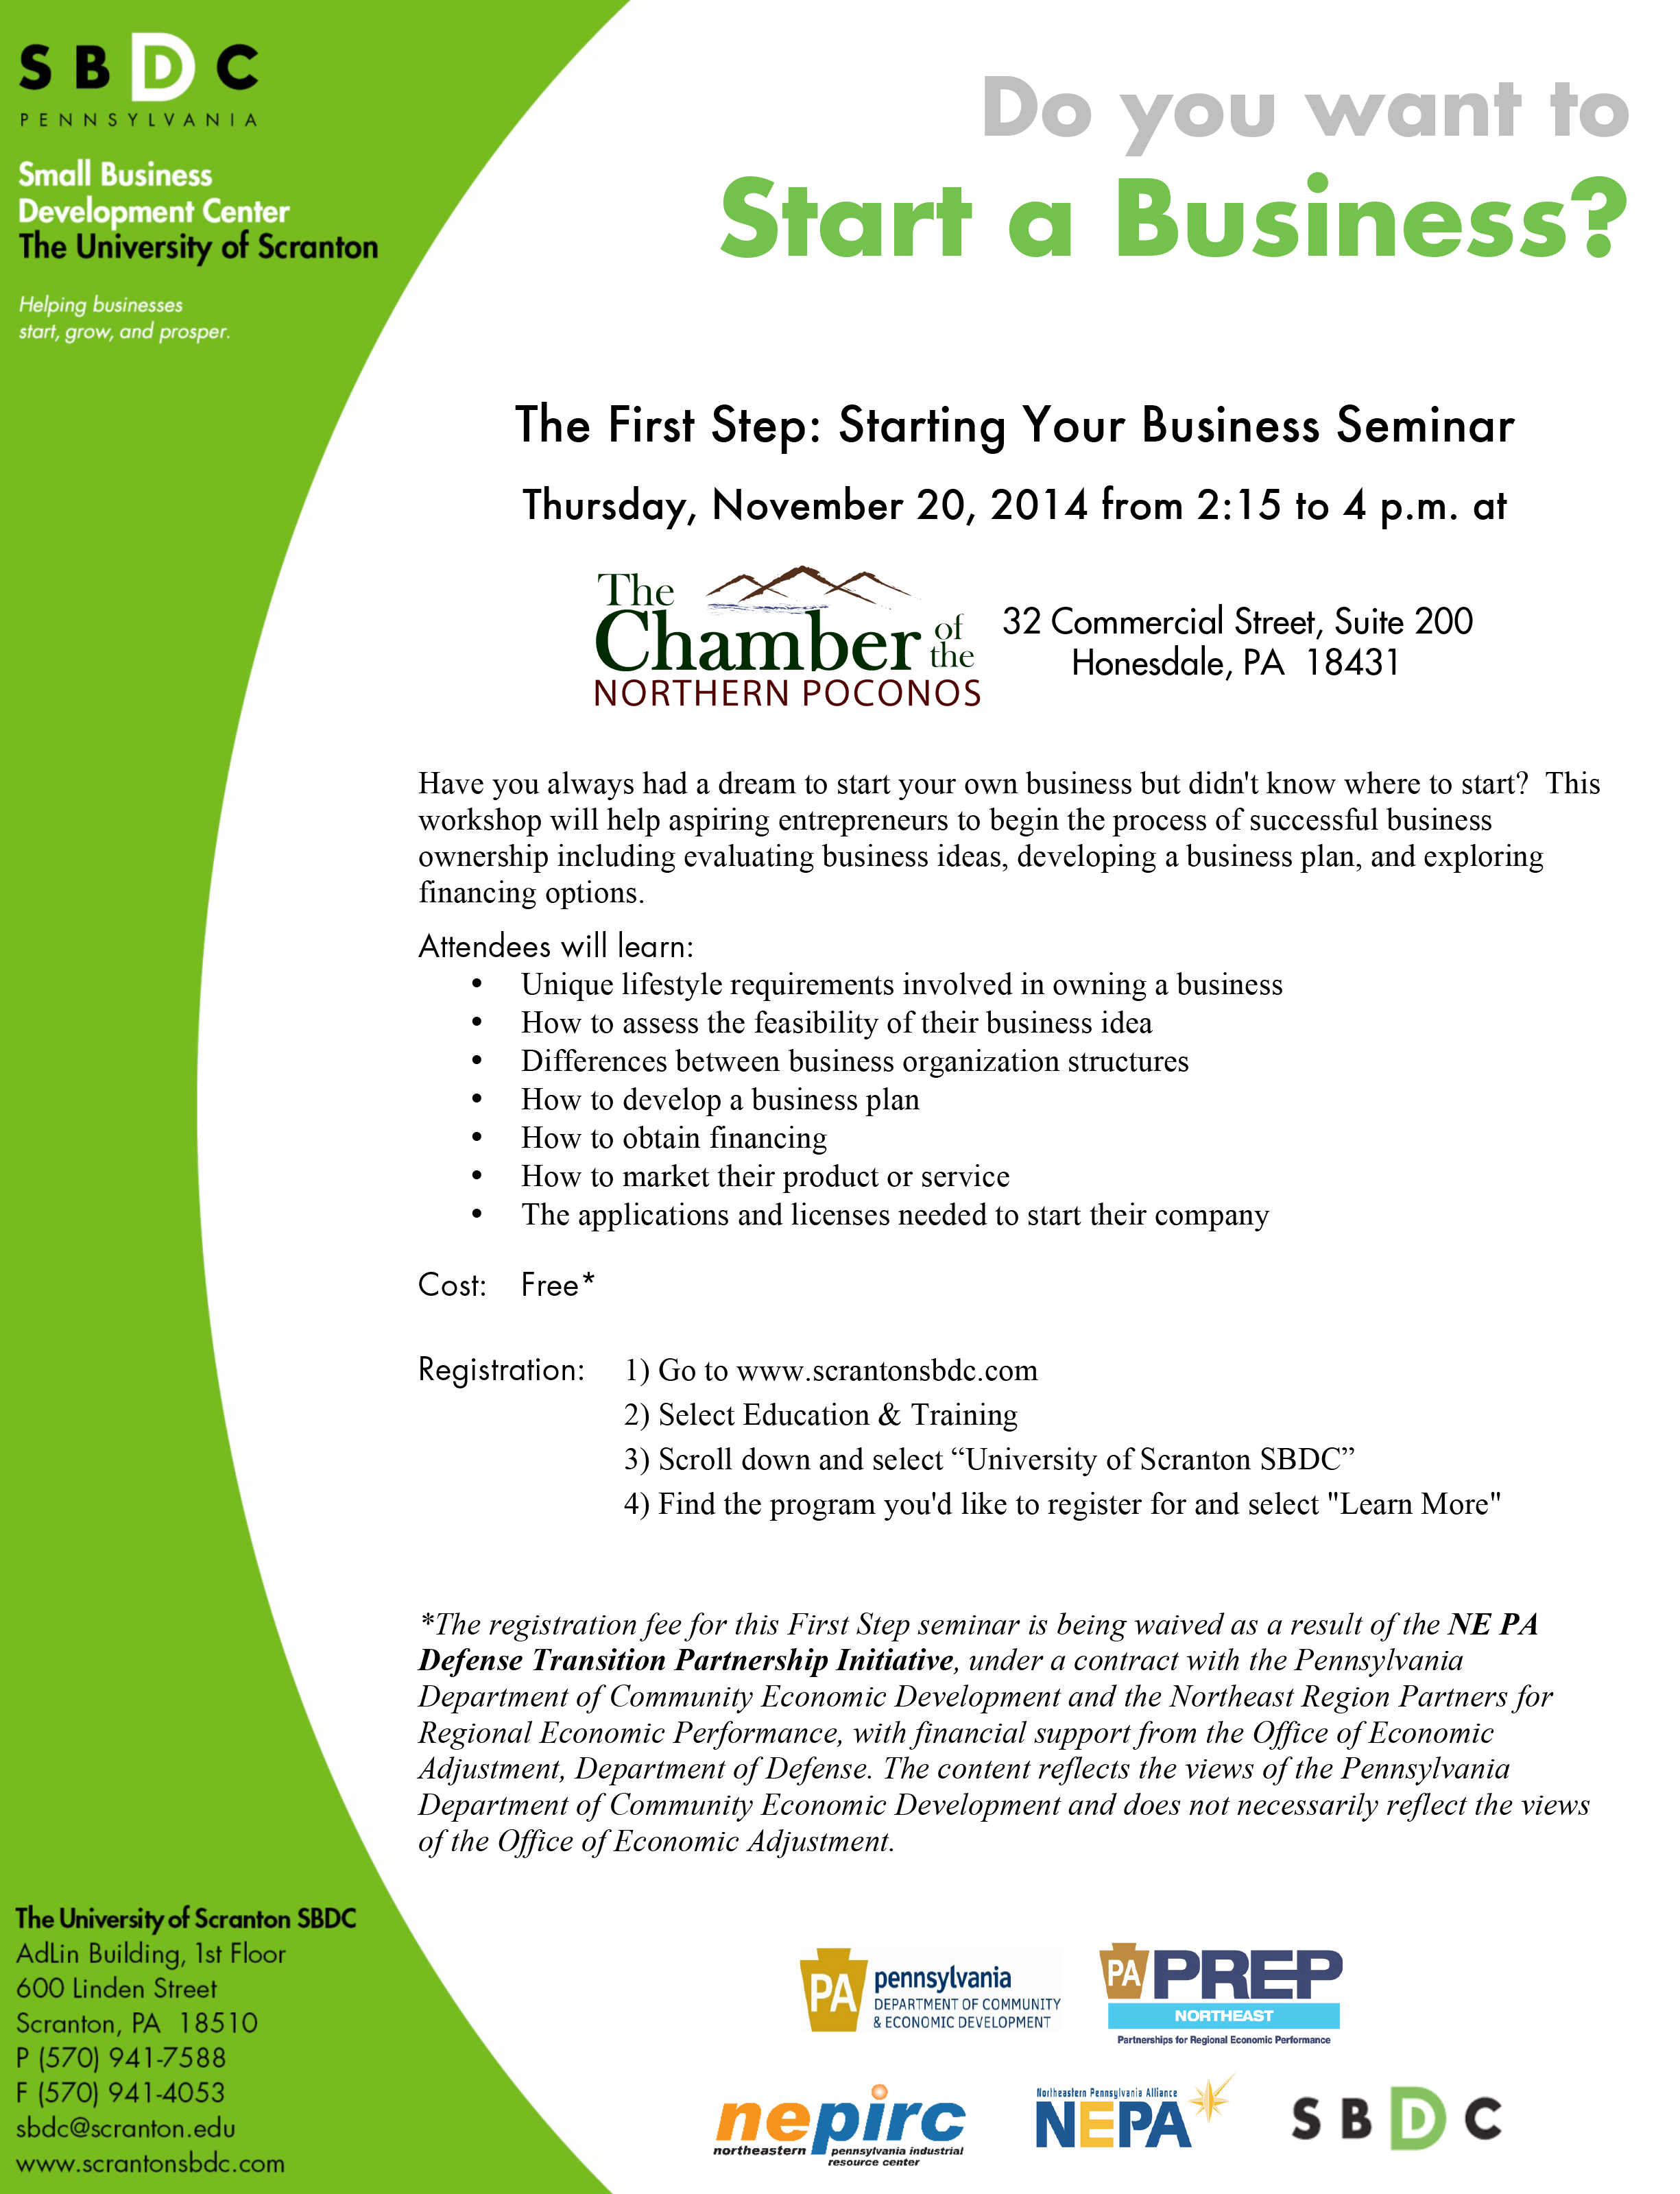 stating a business seminar Honesdale